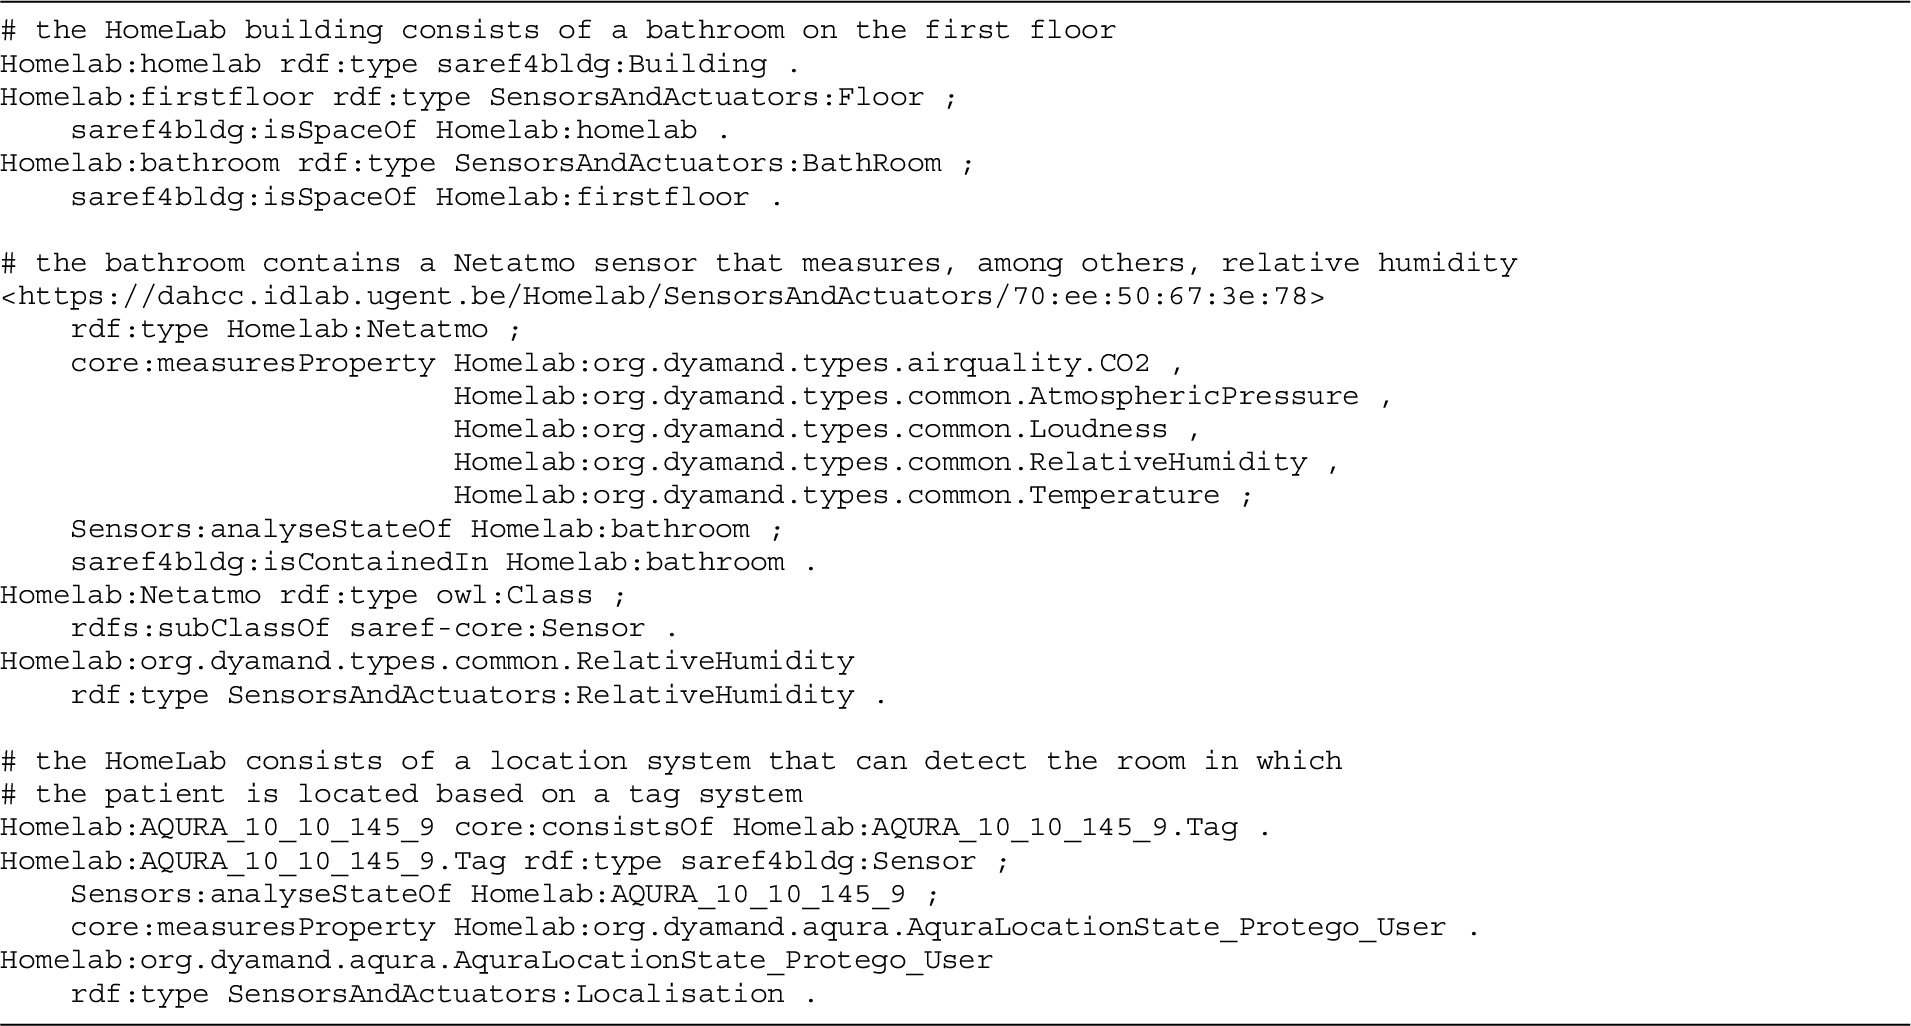 Context description of the service flat of the example patient in the use case scenario and corresponding running example, in RDF/Turtle syntax. Only a selected set of context definitions are presented, some are omitted.